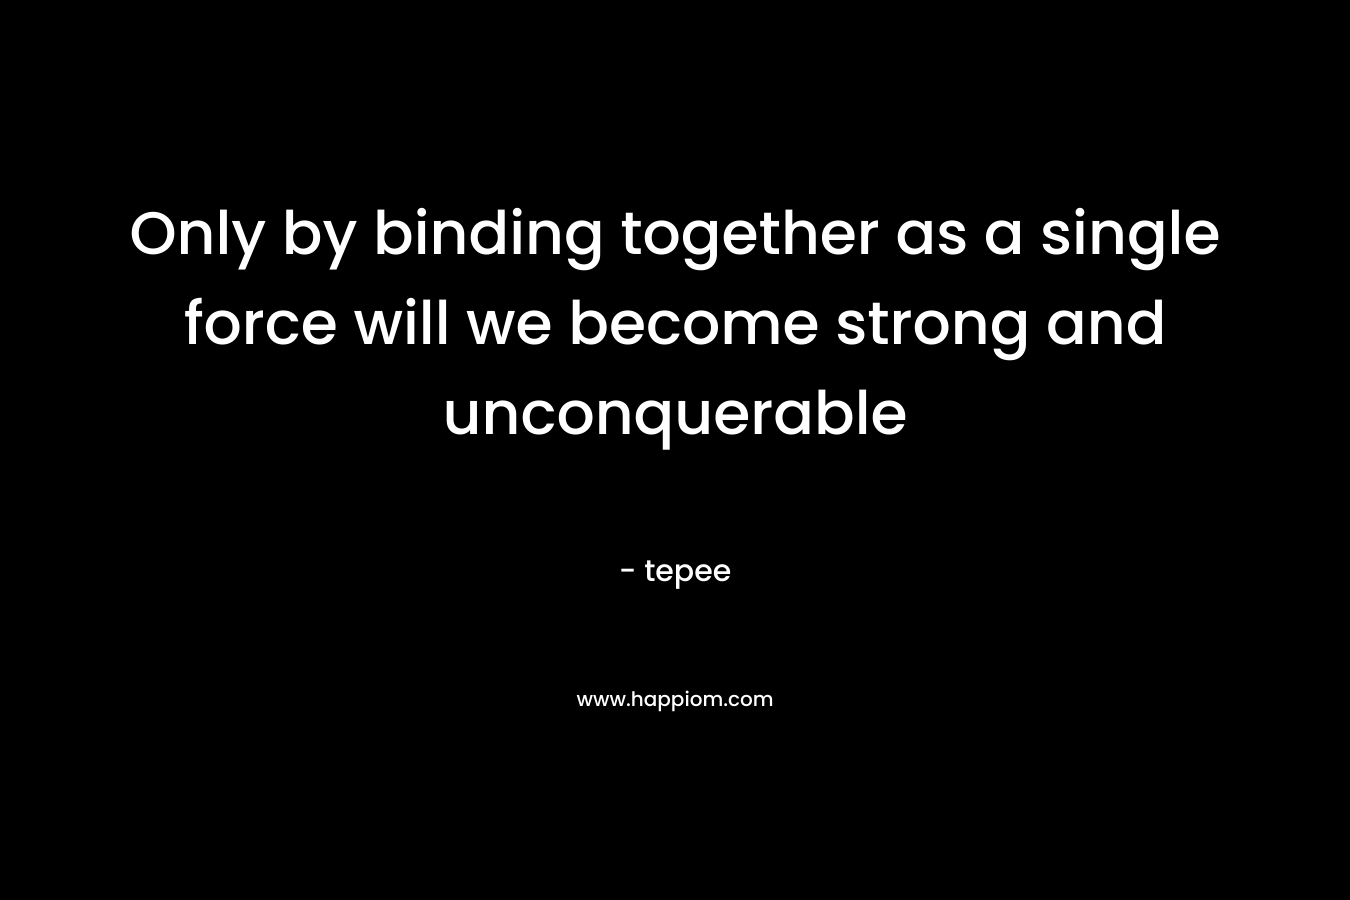 Only by binding together as a single force will we become strong and unconquerable – tepee